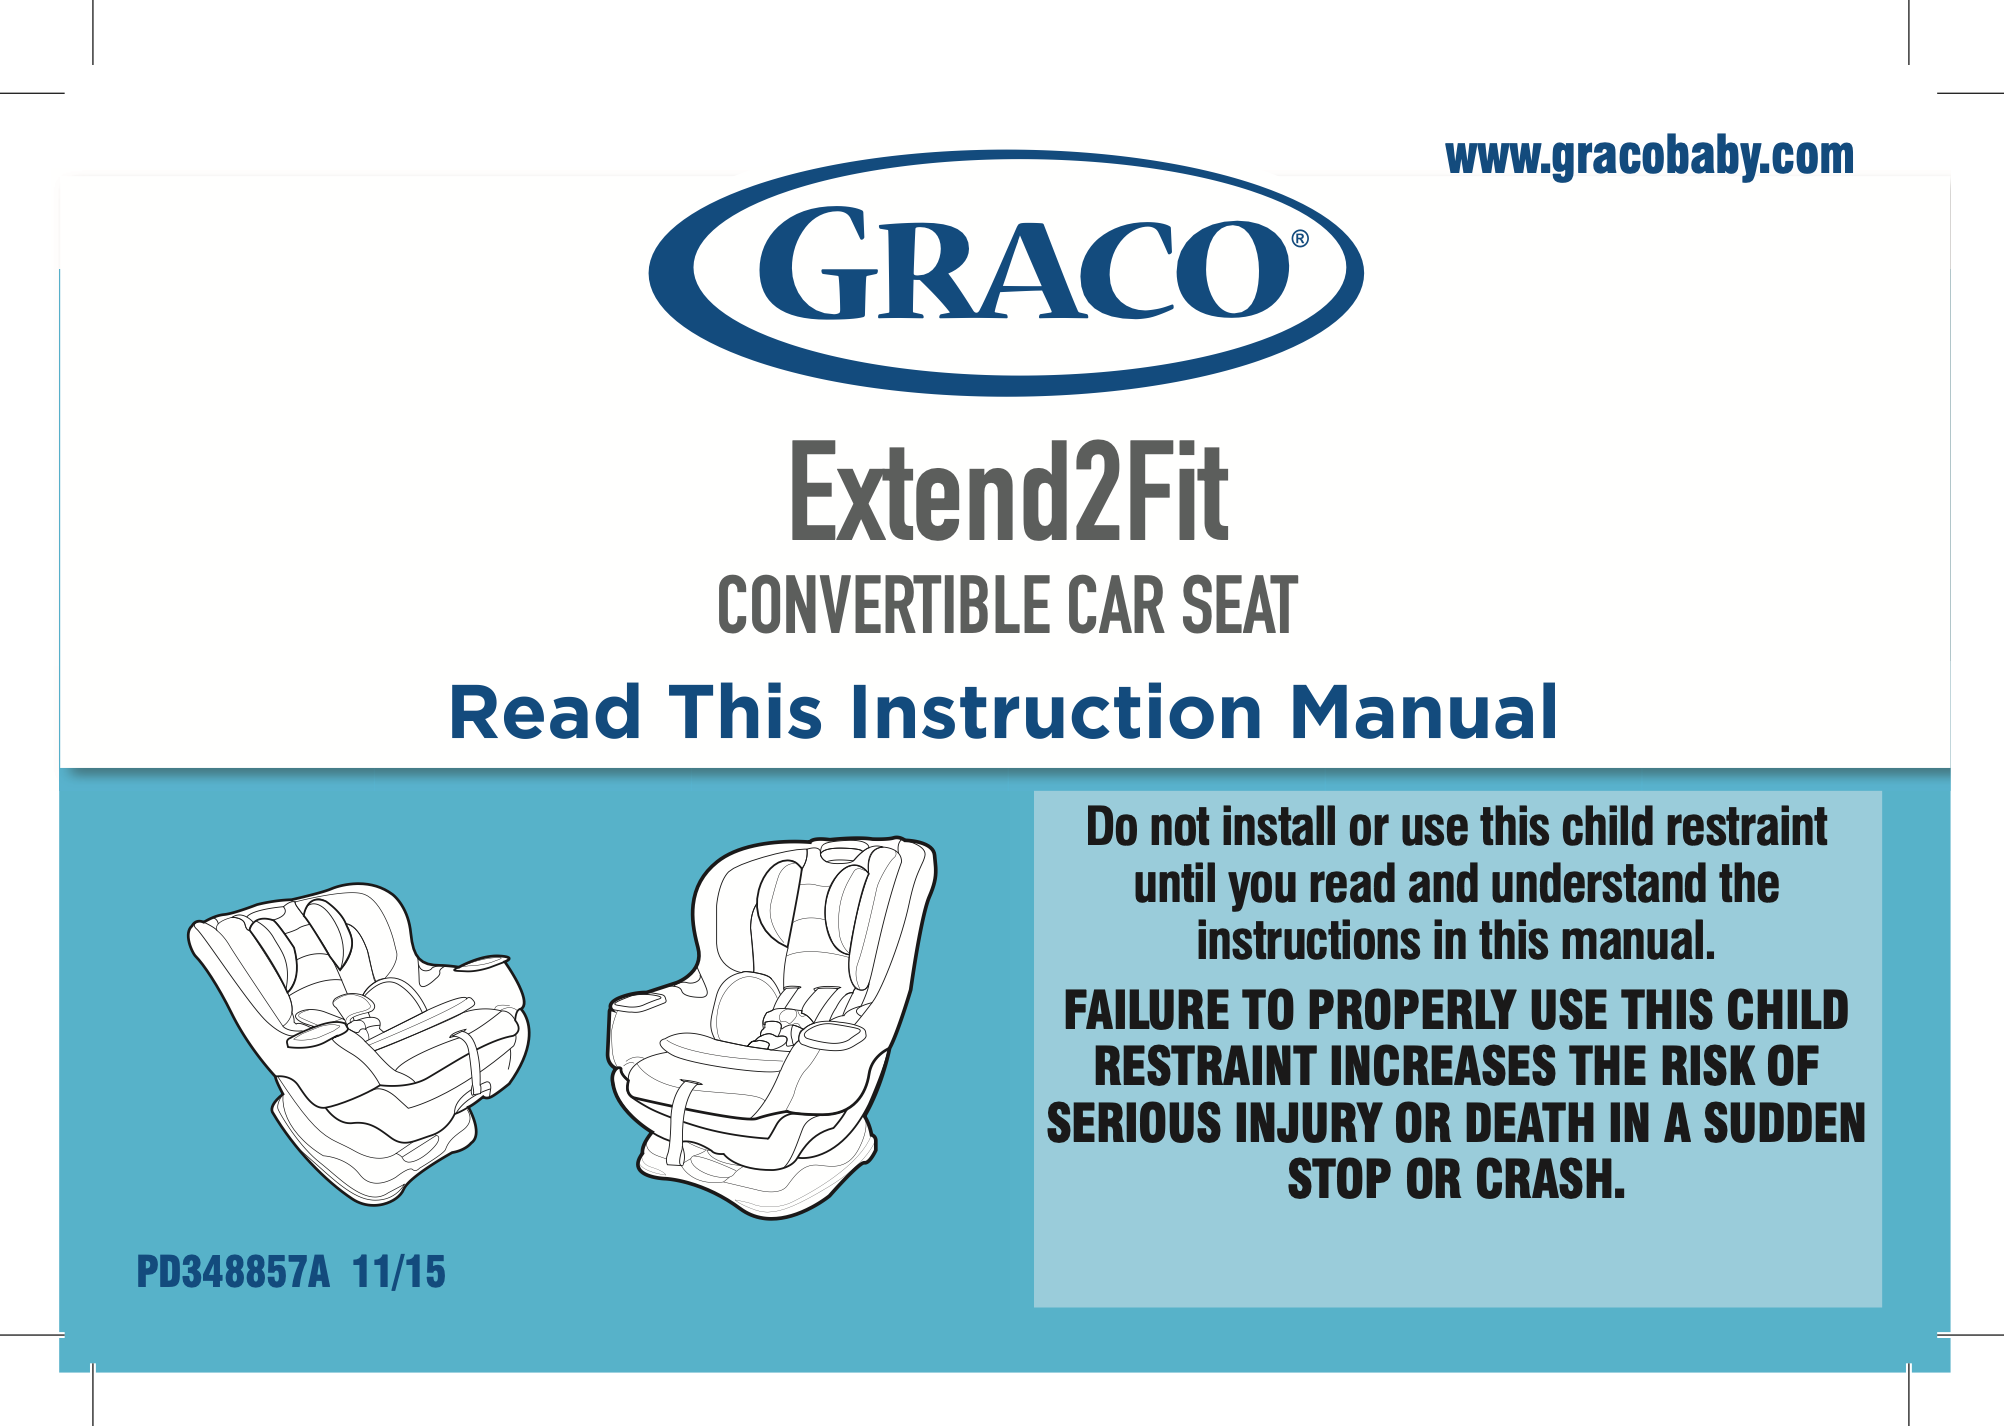 Graco Extend2Fit Manual